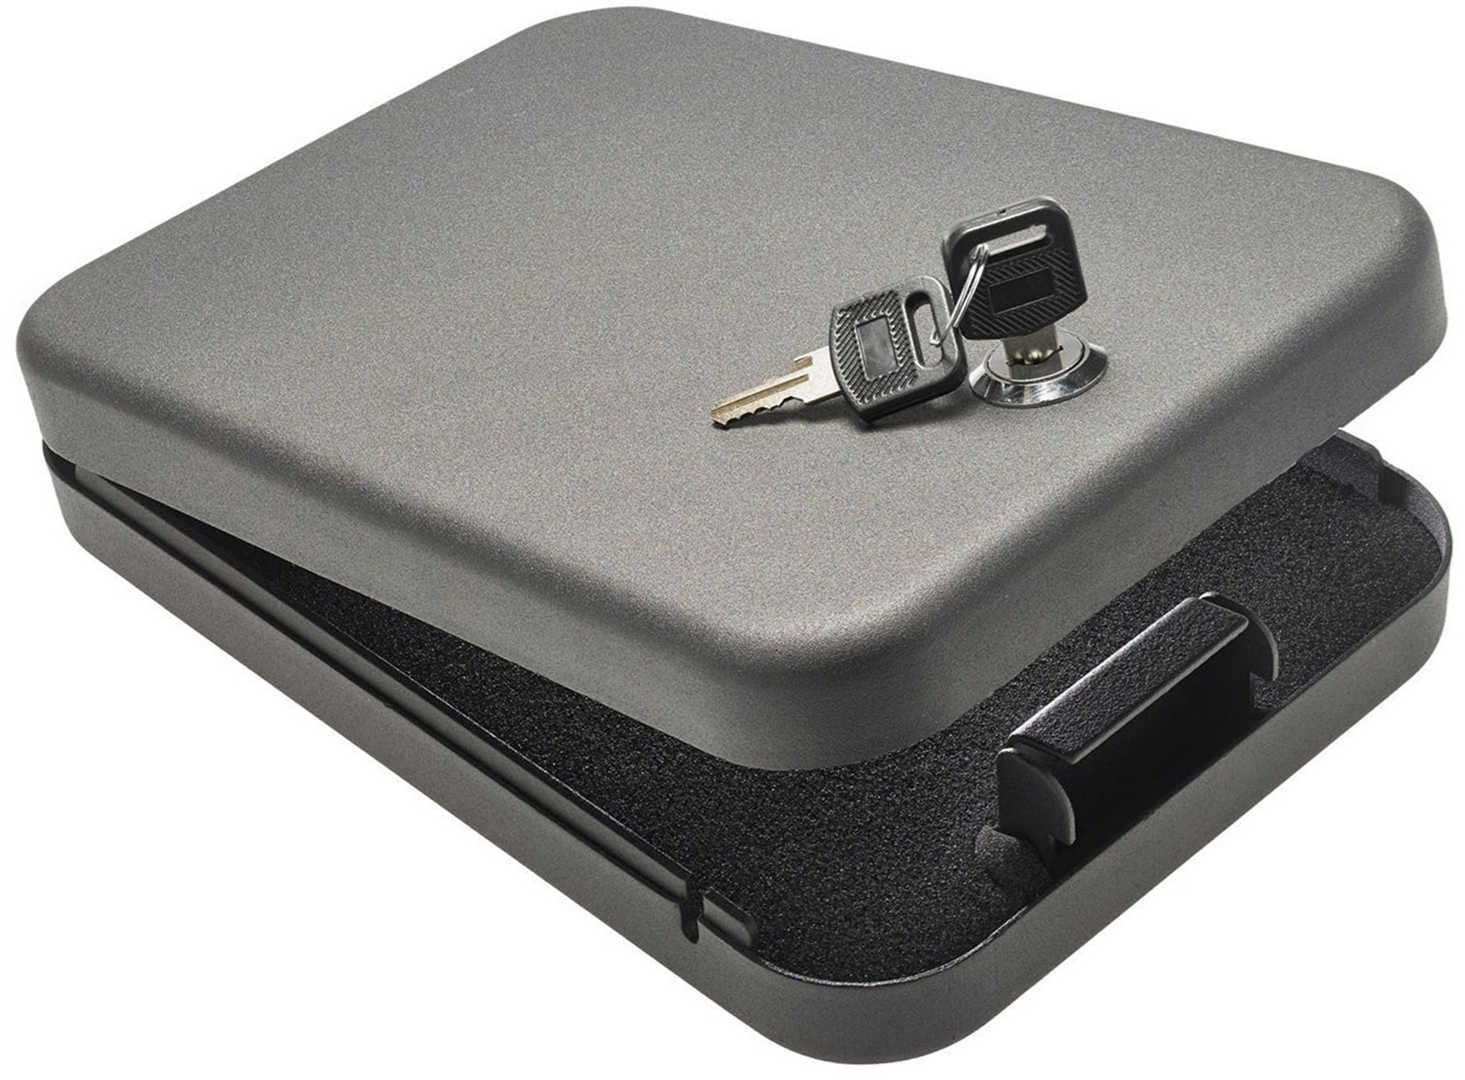 SnapSafe Lock Box Large 9.5" x 6.5" 1.75" Key 16 Gauge Steel Cable Included Black Finish 75200